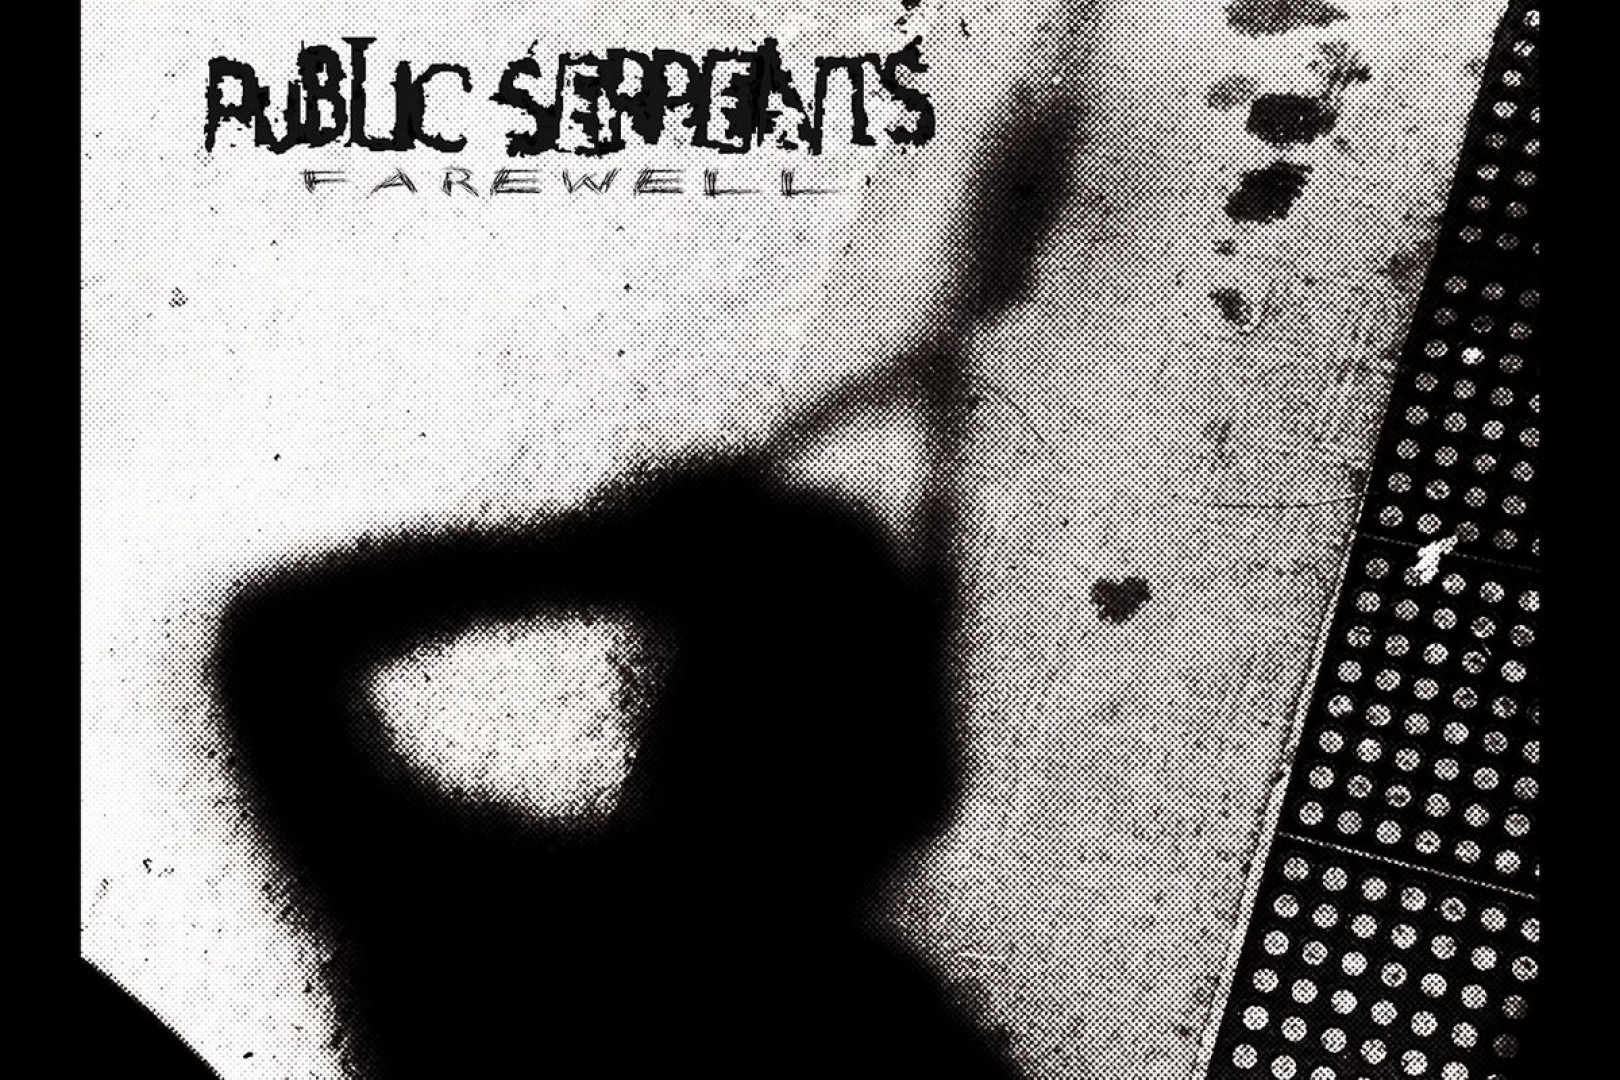 Public Serpents release new song “Farewell”